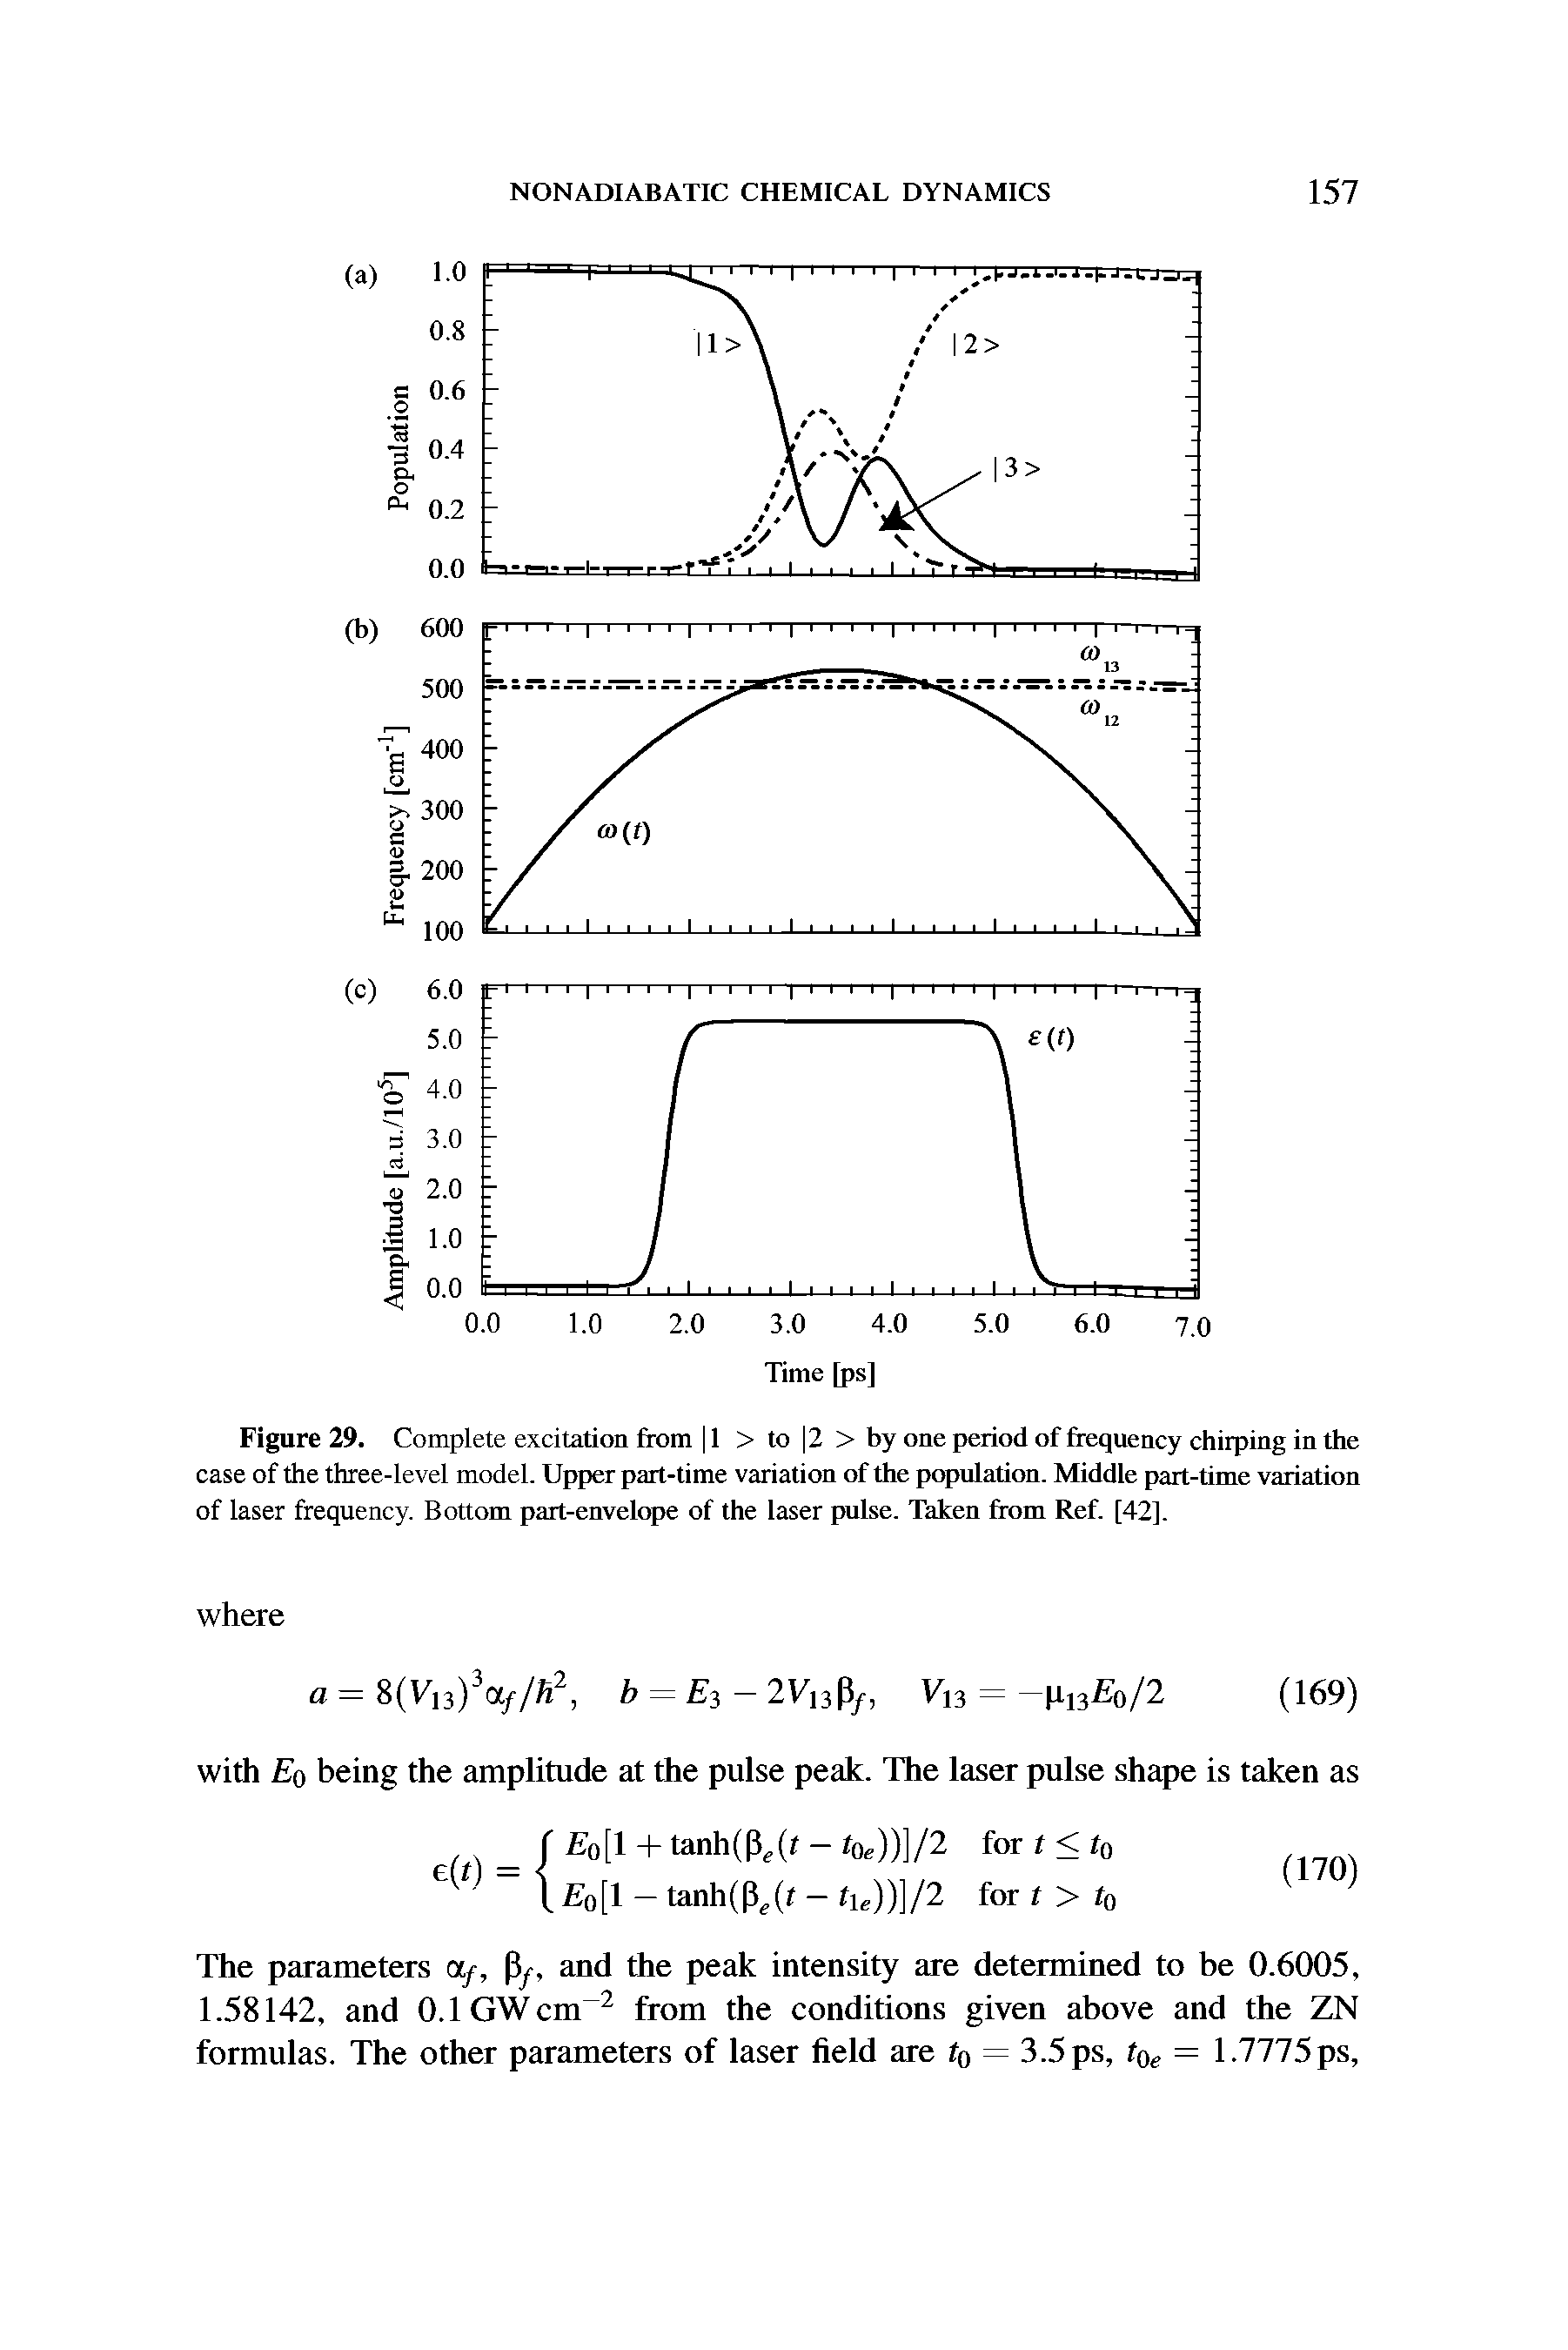 Figure 29. Complete excitation from 11 > to 2 > by one period of frequency chirping in the case of the three-level model. Upper part-time variation of the population. Middle part-time variation of laser frequency. Bottom part-envelope of the laser pulse. Taken from Ref. [42].